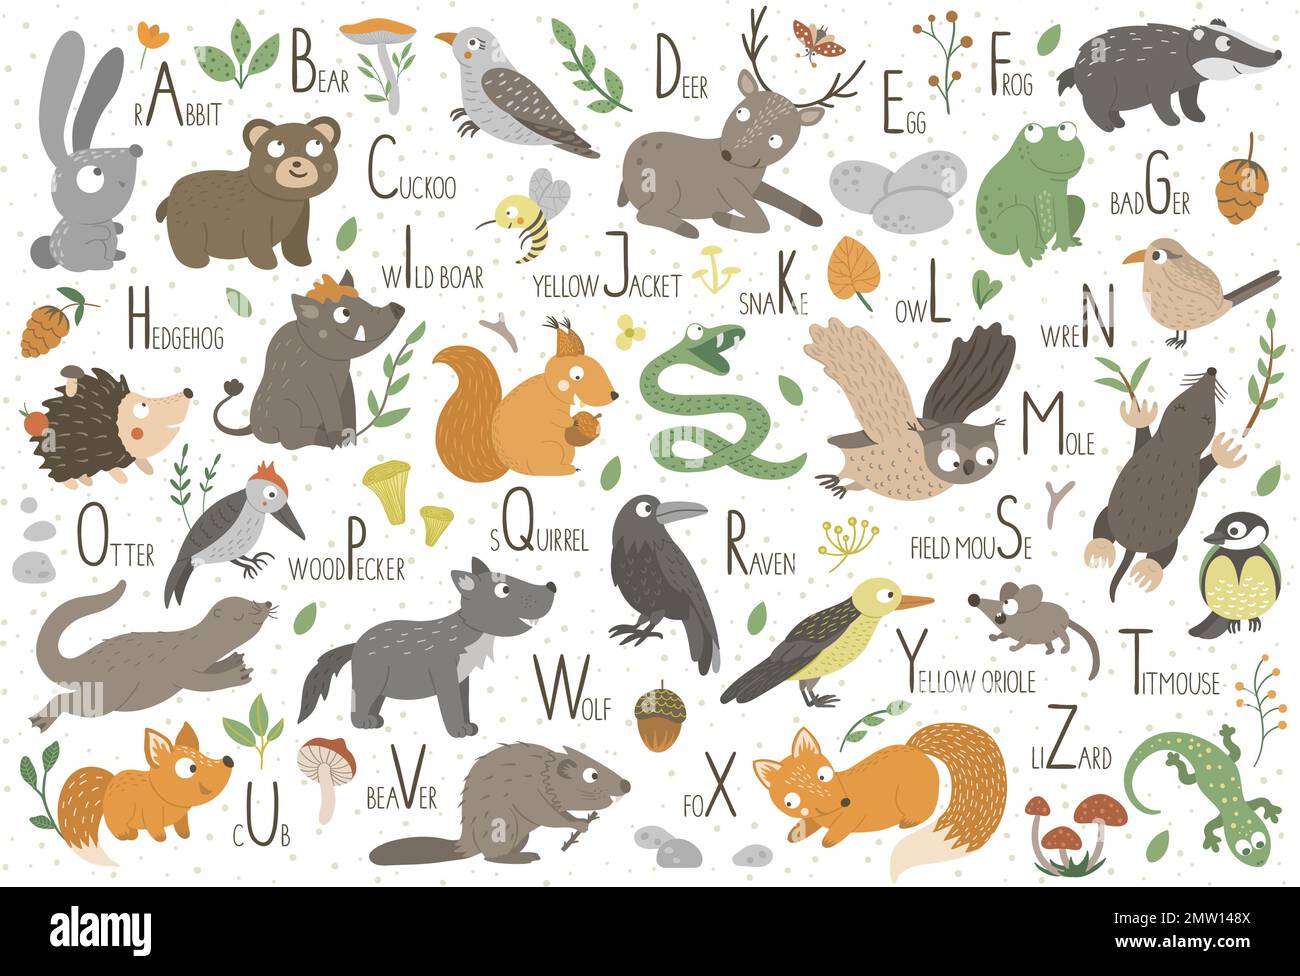 Woodland alphabet for children. Cute flat ABC with forest animals. Horizontal layout funny poster for teaching reading on white background. Stock Vector